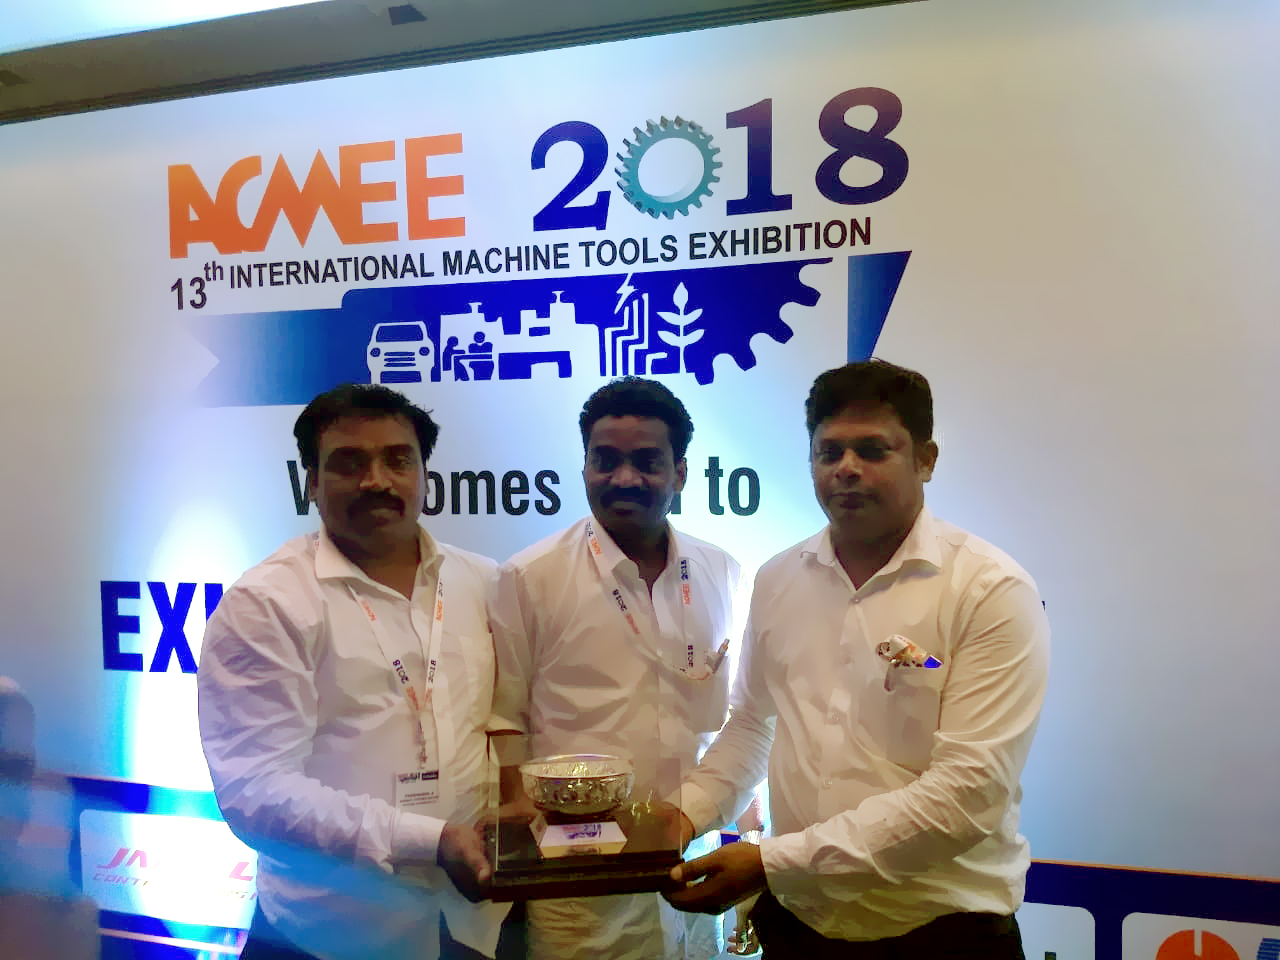 Jyoti is awarded for The best technology display of the show at ACMEE '18, Chennai